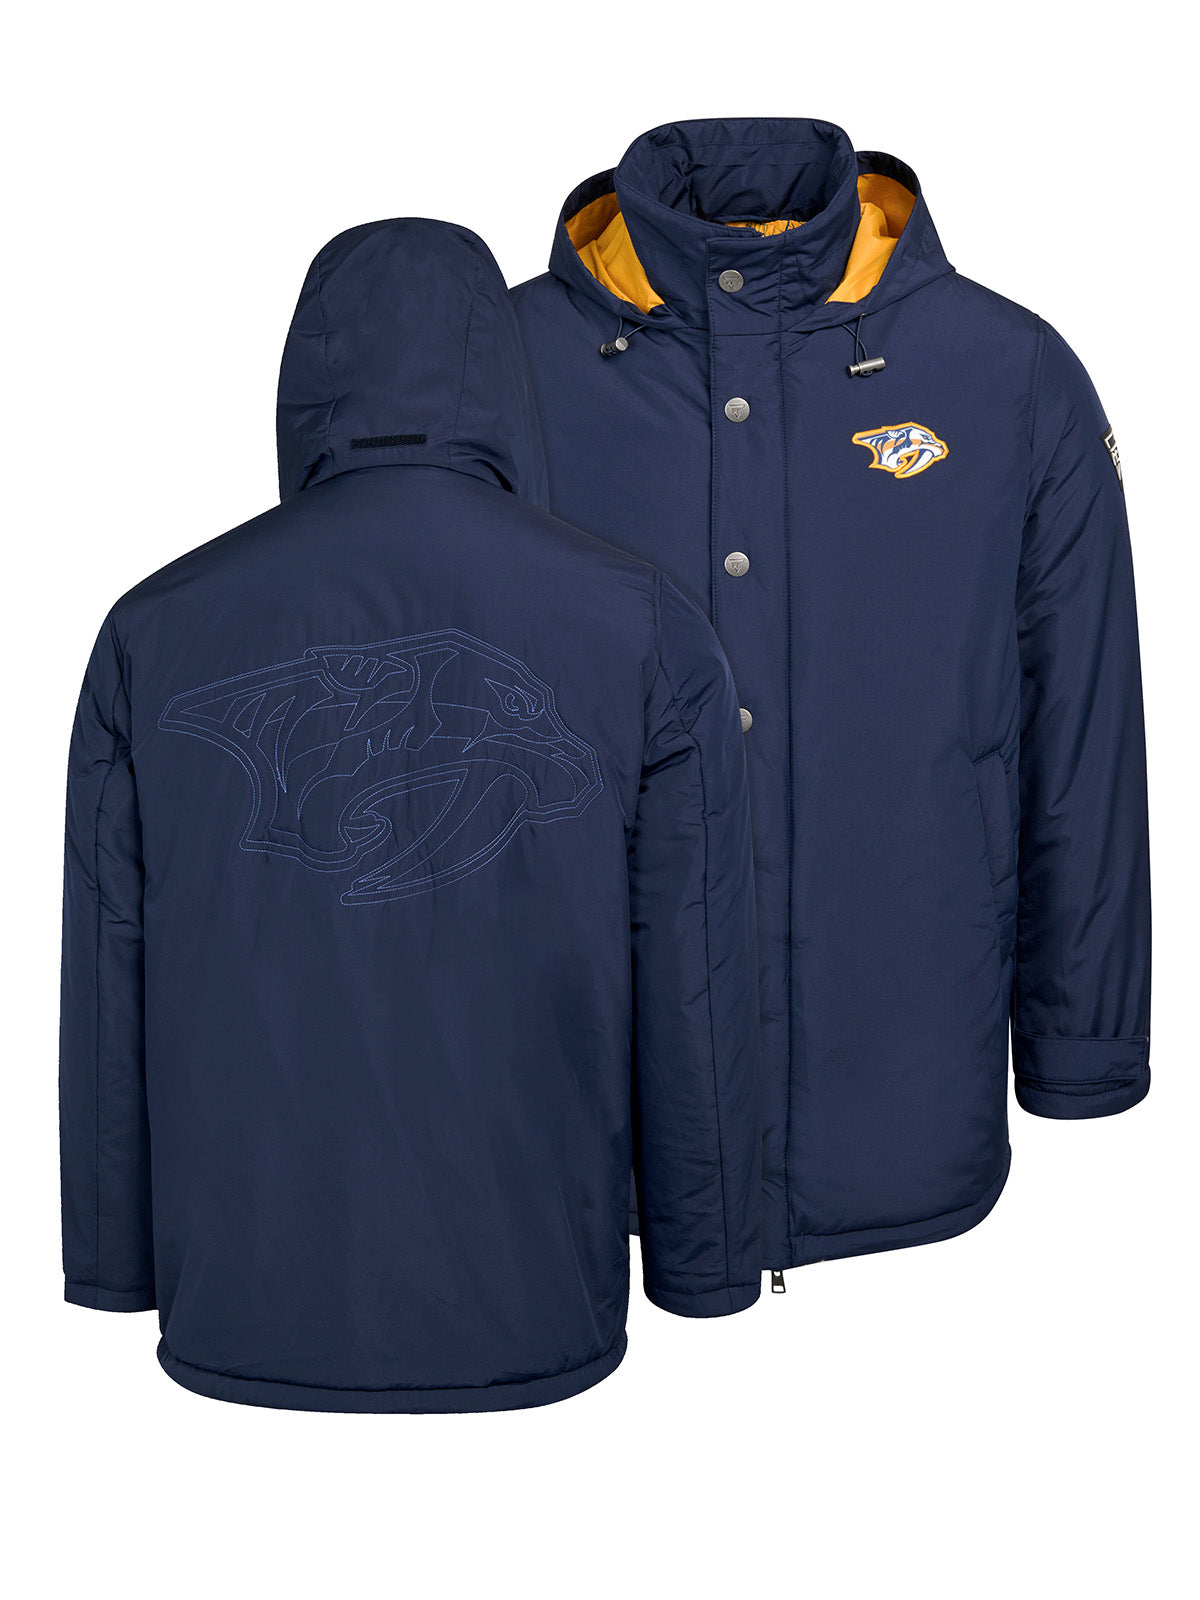 Nashville Predators Coach's Jacket - The jacket features a quilted stitch of the Nashville Predators logo centered on the back and has a removal hood in the team colors, elevating this NHL hockey clothing collection